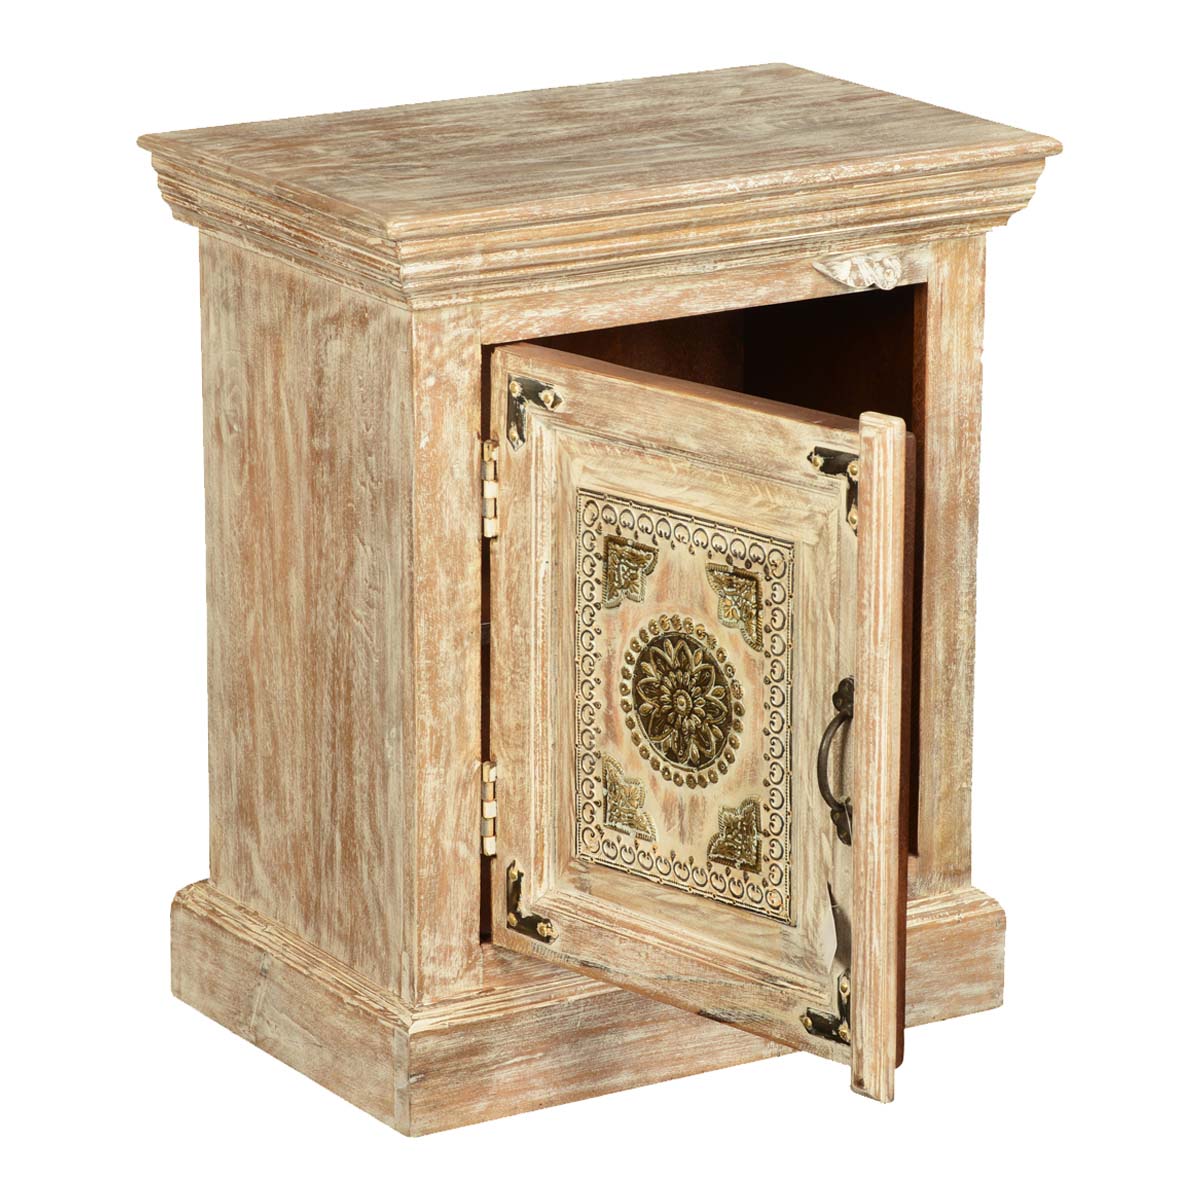 winter flower mango wood end table nightstand cabinet side decor bengal manor twist accent target narrow nesting tables tall corner with mirror white tablecloth light lamp